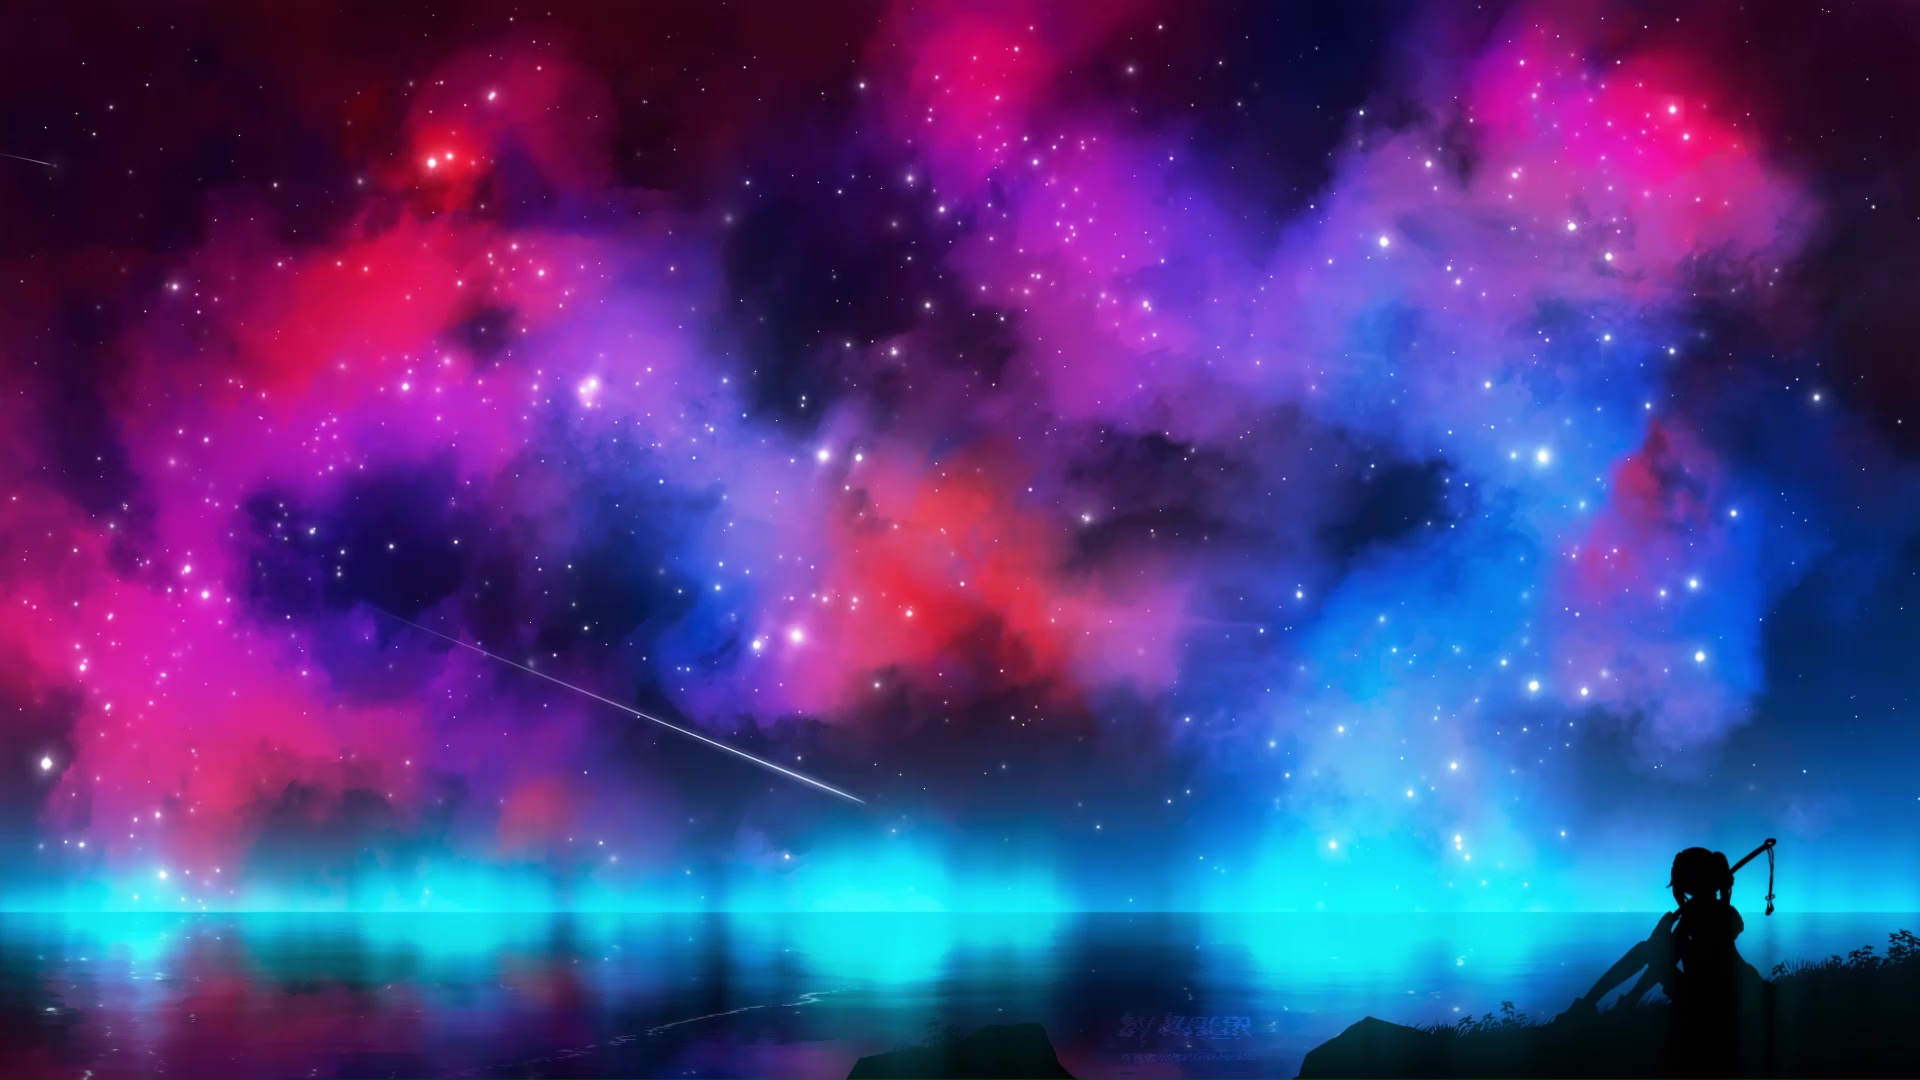 Anime Girl Sitting On The Ground Starry Night Sky Live Wallpaper Moewalls